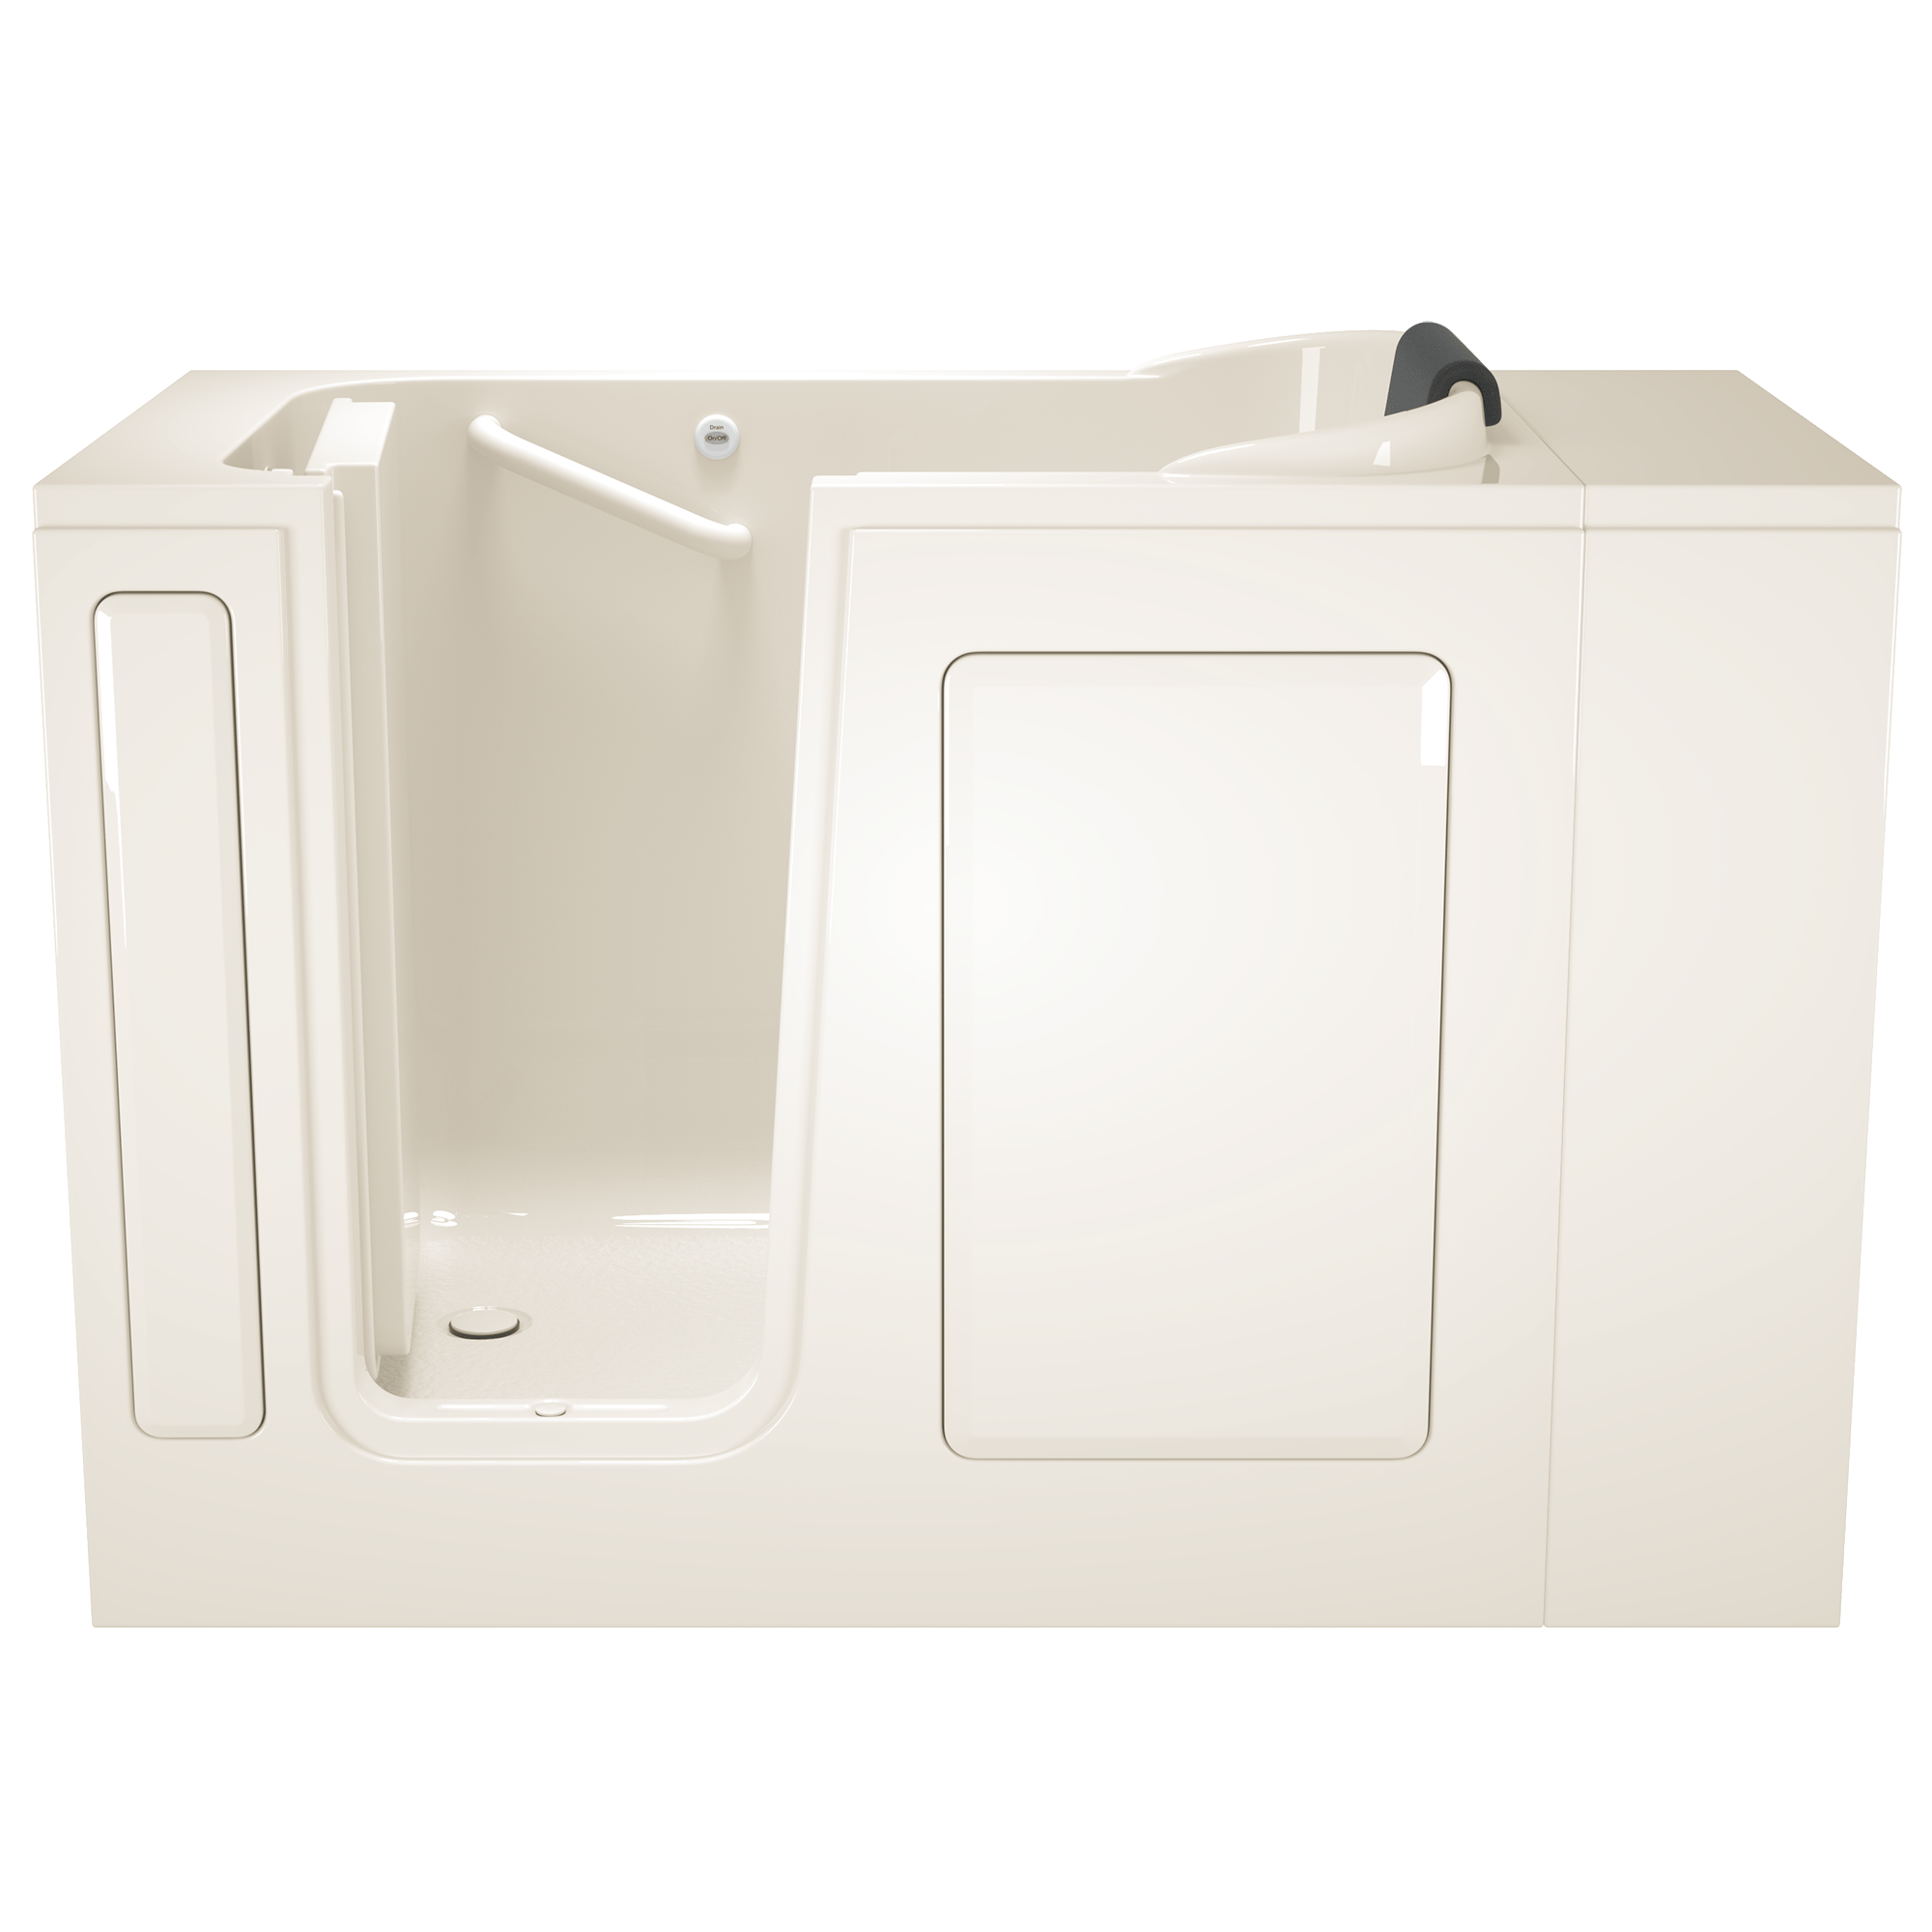 Gelcoat Premium Series 28 x 48-Inch Walk-in Tub With Soaker System - Left-Hand Drain